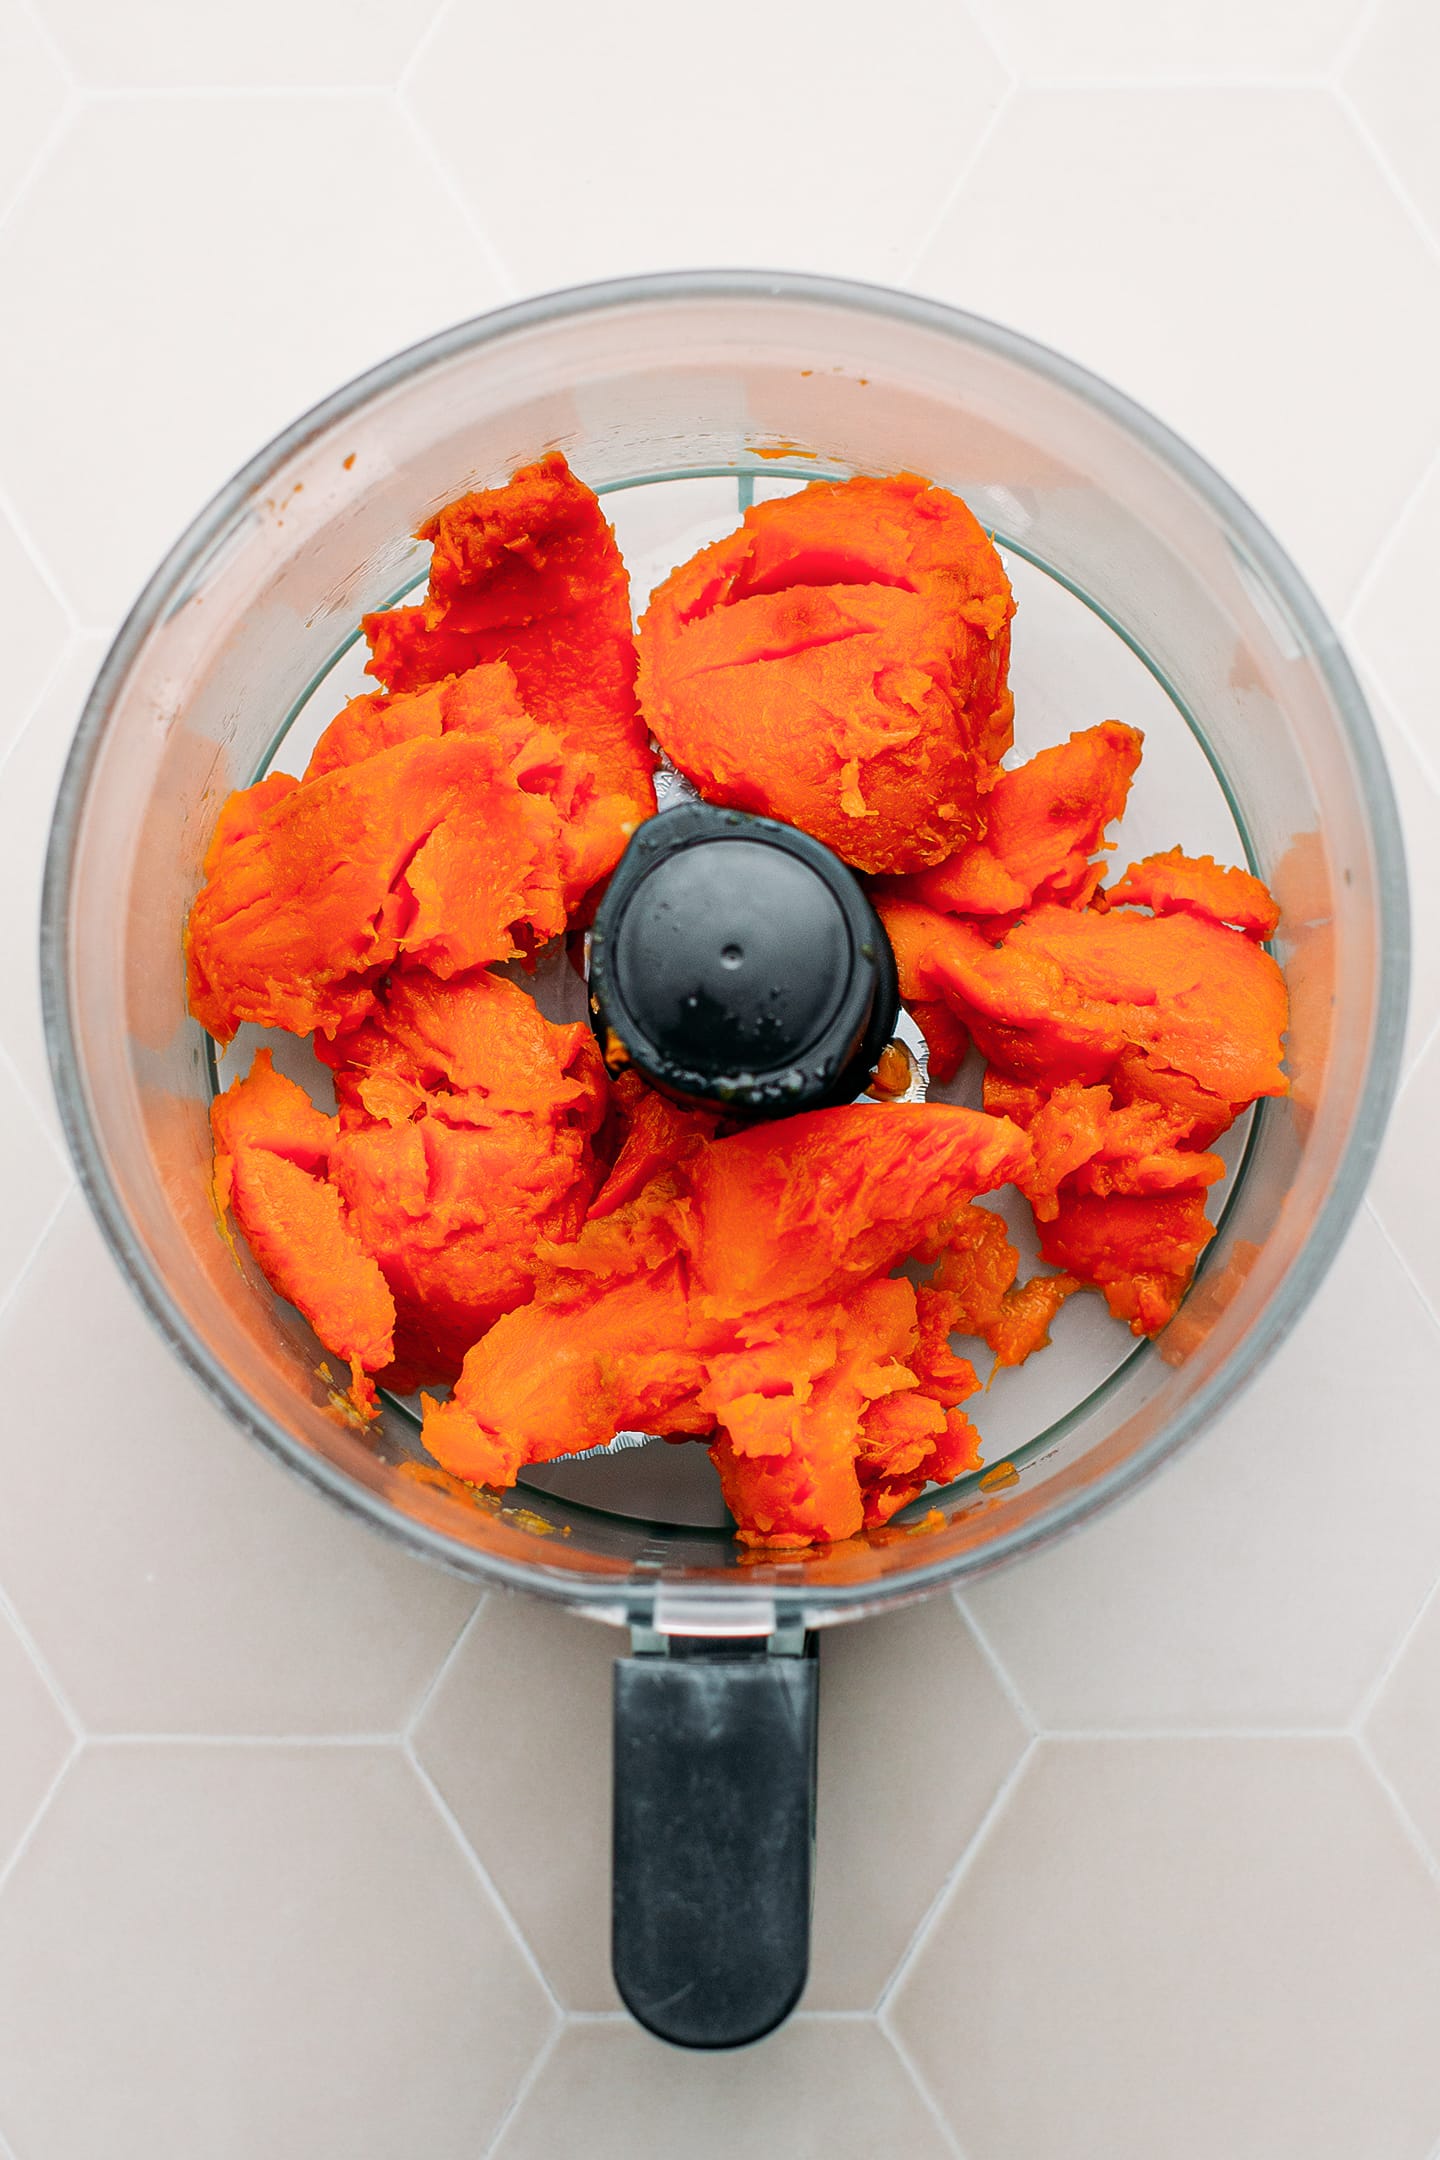 Baked sweet potatoes in a food processor.